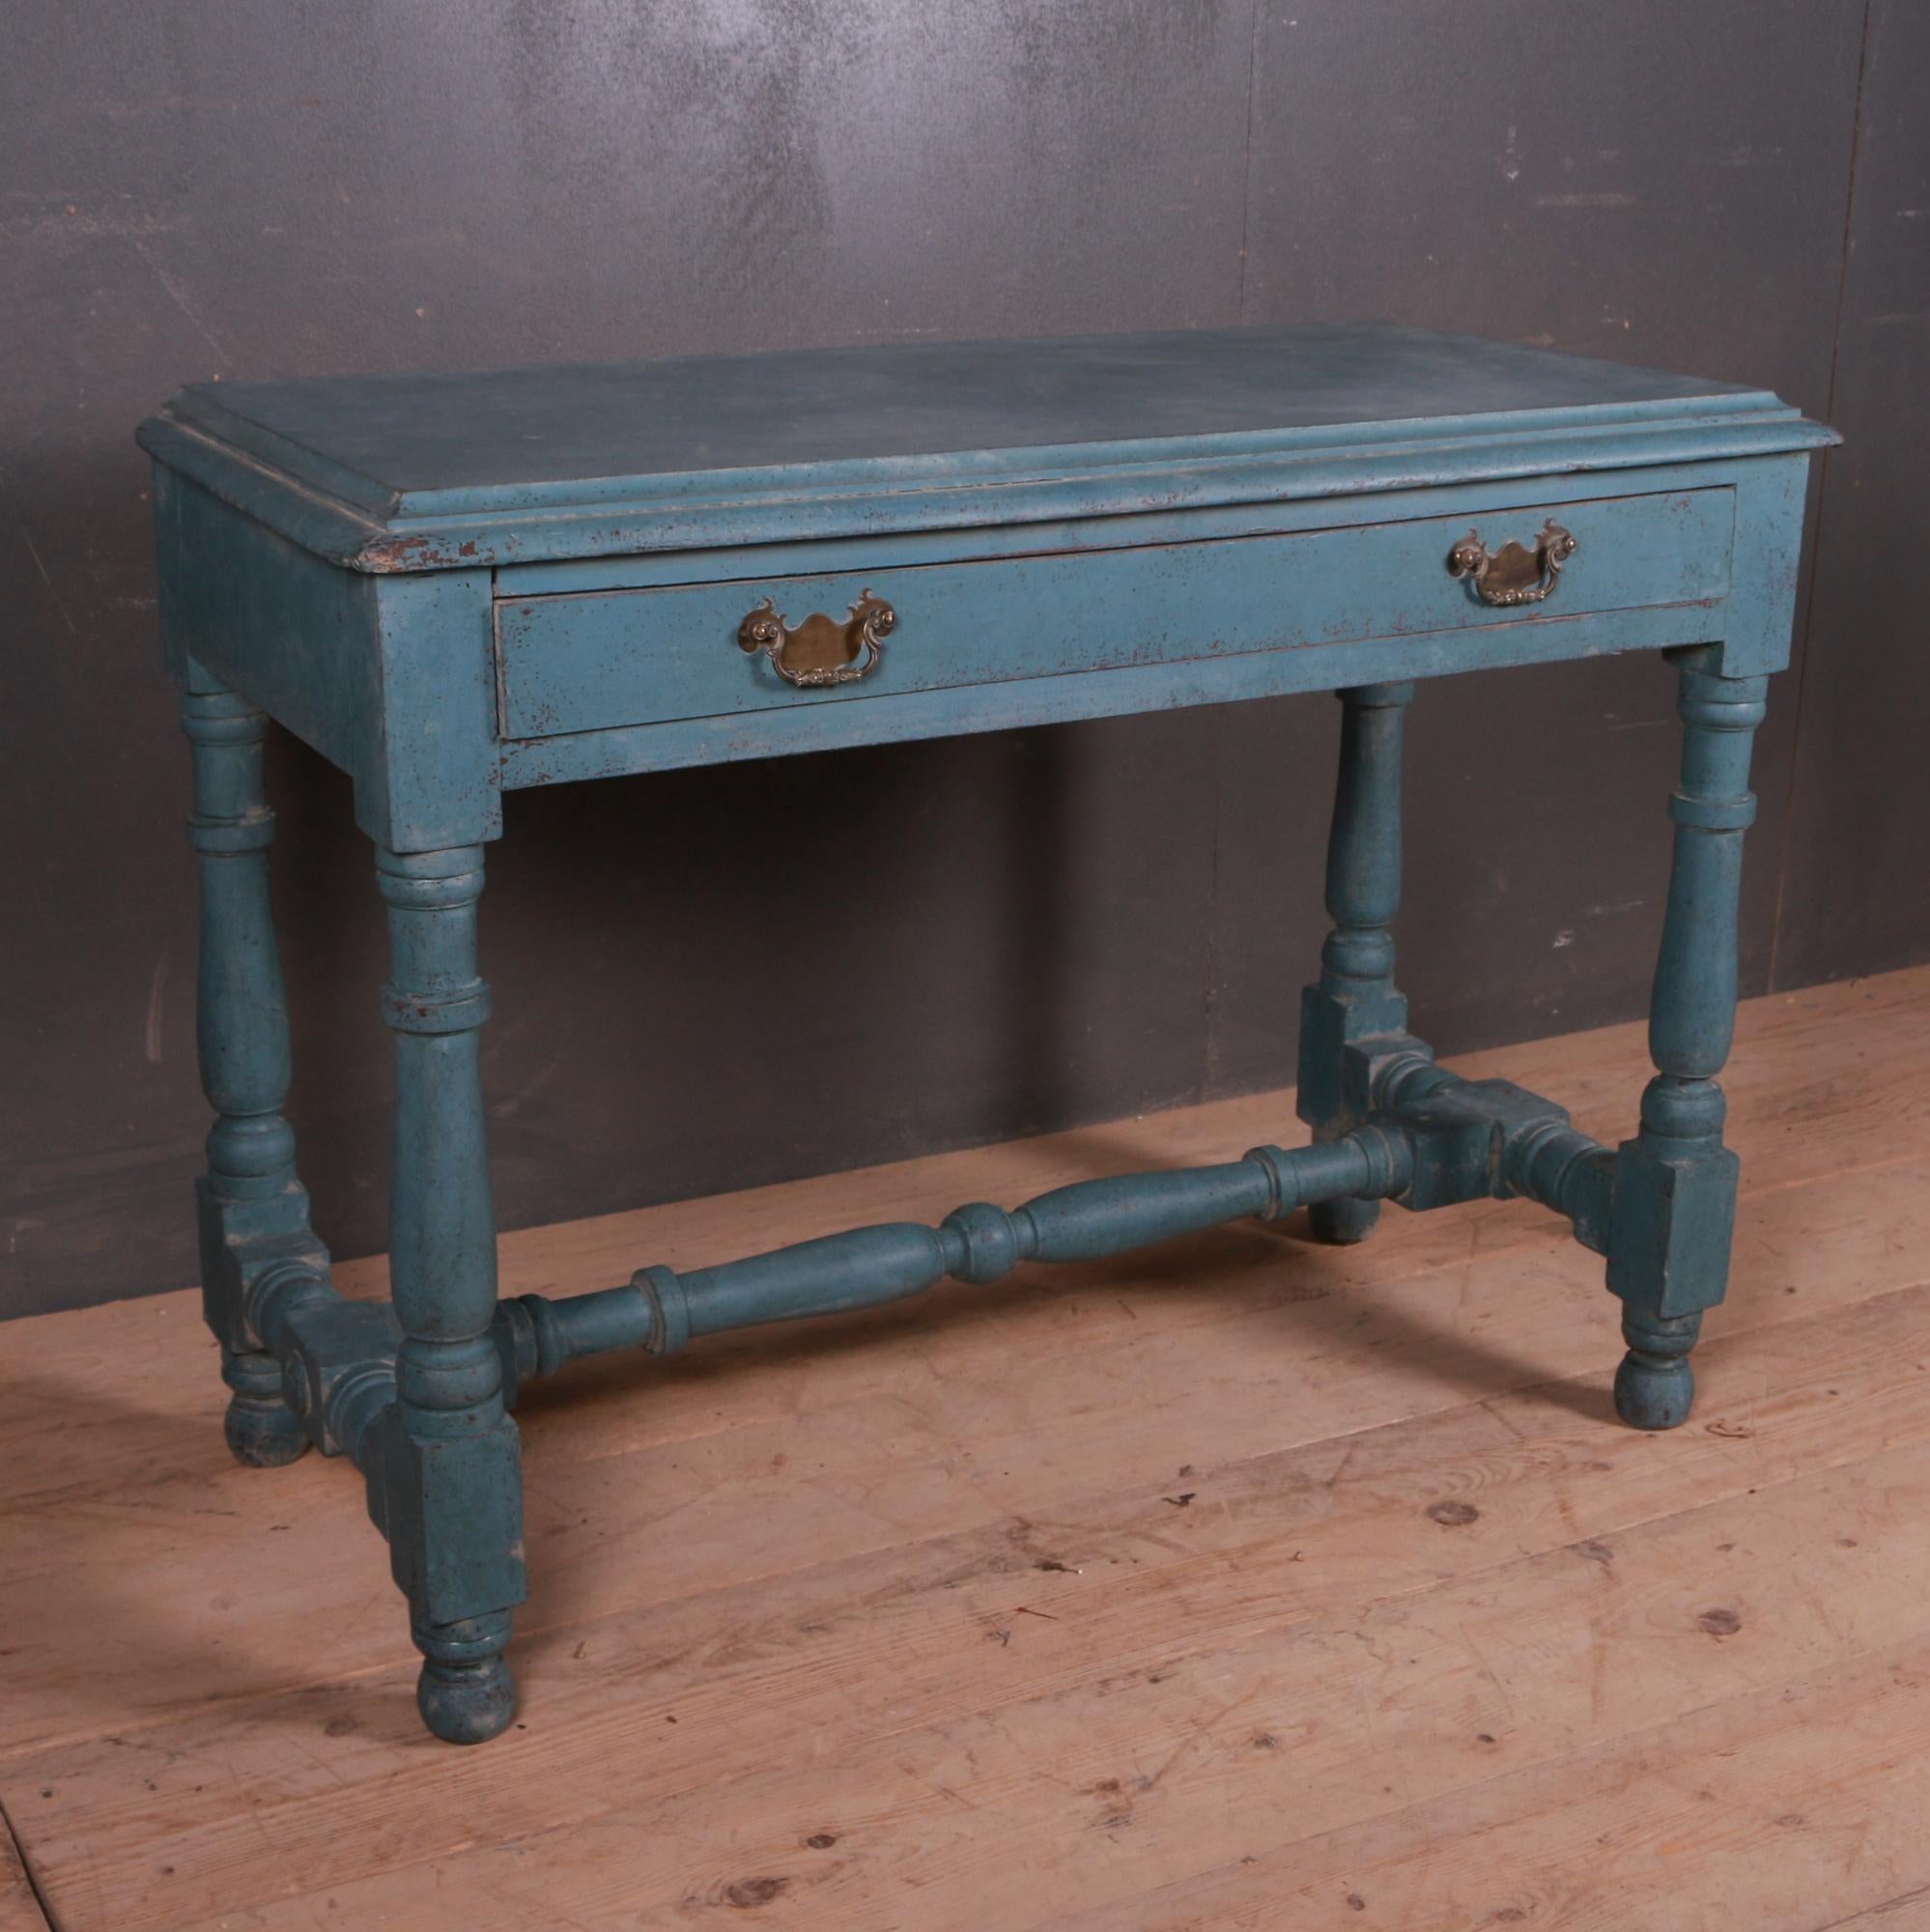 Large 19th century painted one drawer desk/lamp table, 1850.

Dimensions
42.5 inches (108 cms) wide
20 inches (51 cms) deep
31.5 inches (80 cms) high.